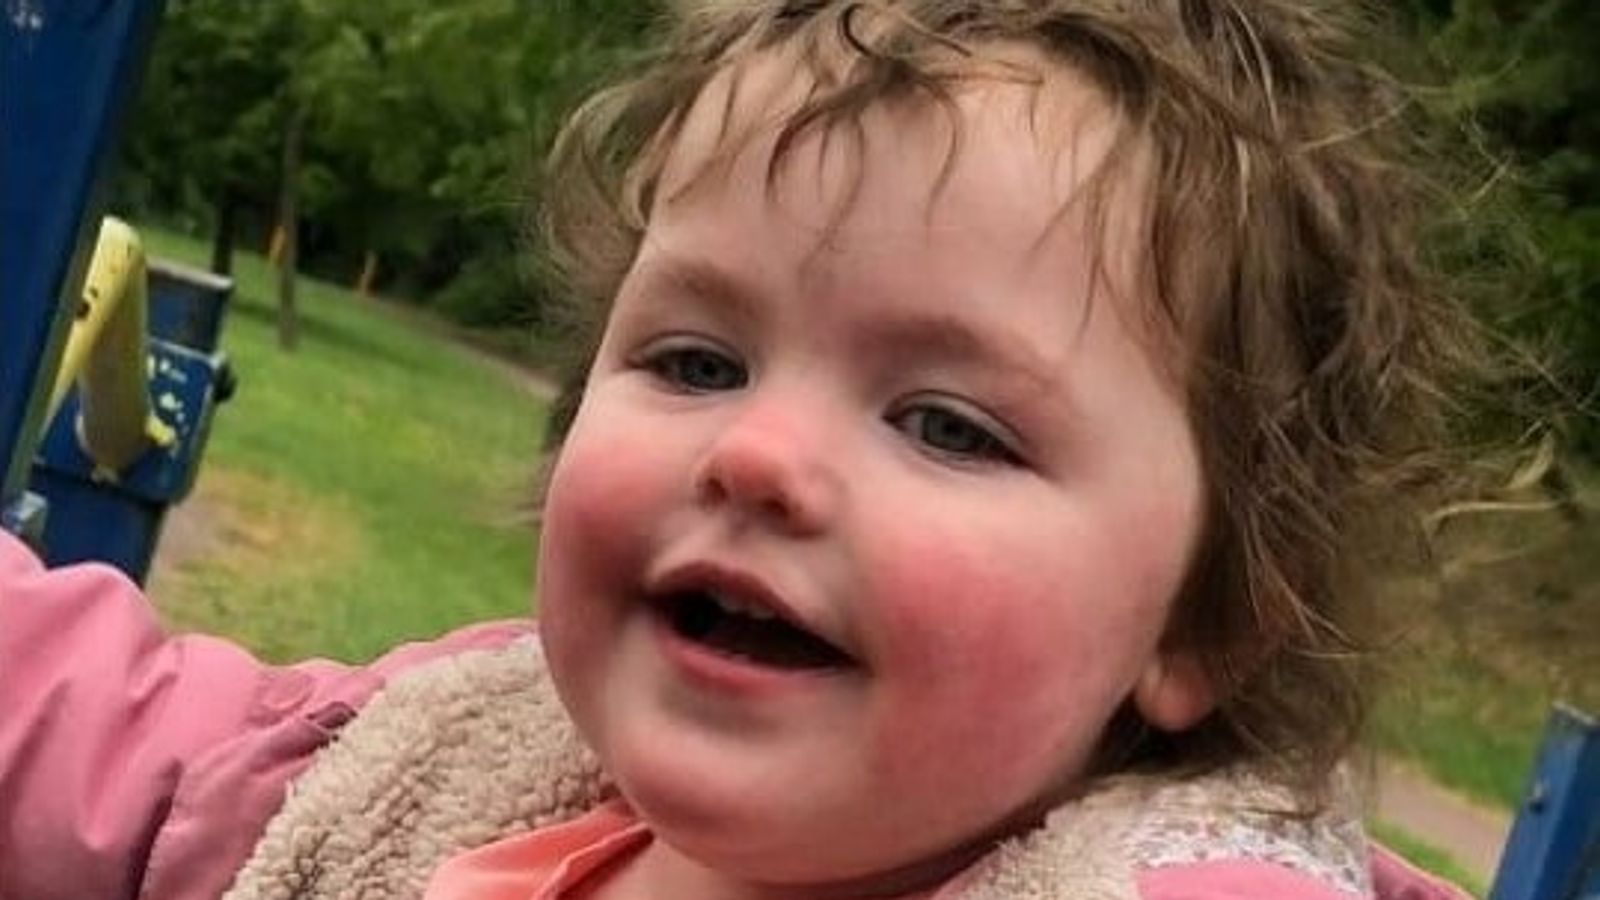 Four-year-old Alice Stones was also mauled to death by a dog in her back garden in February 2023